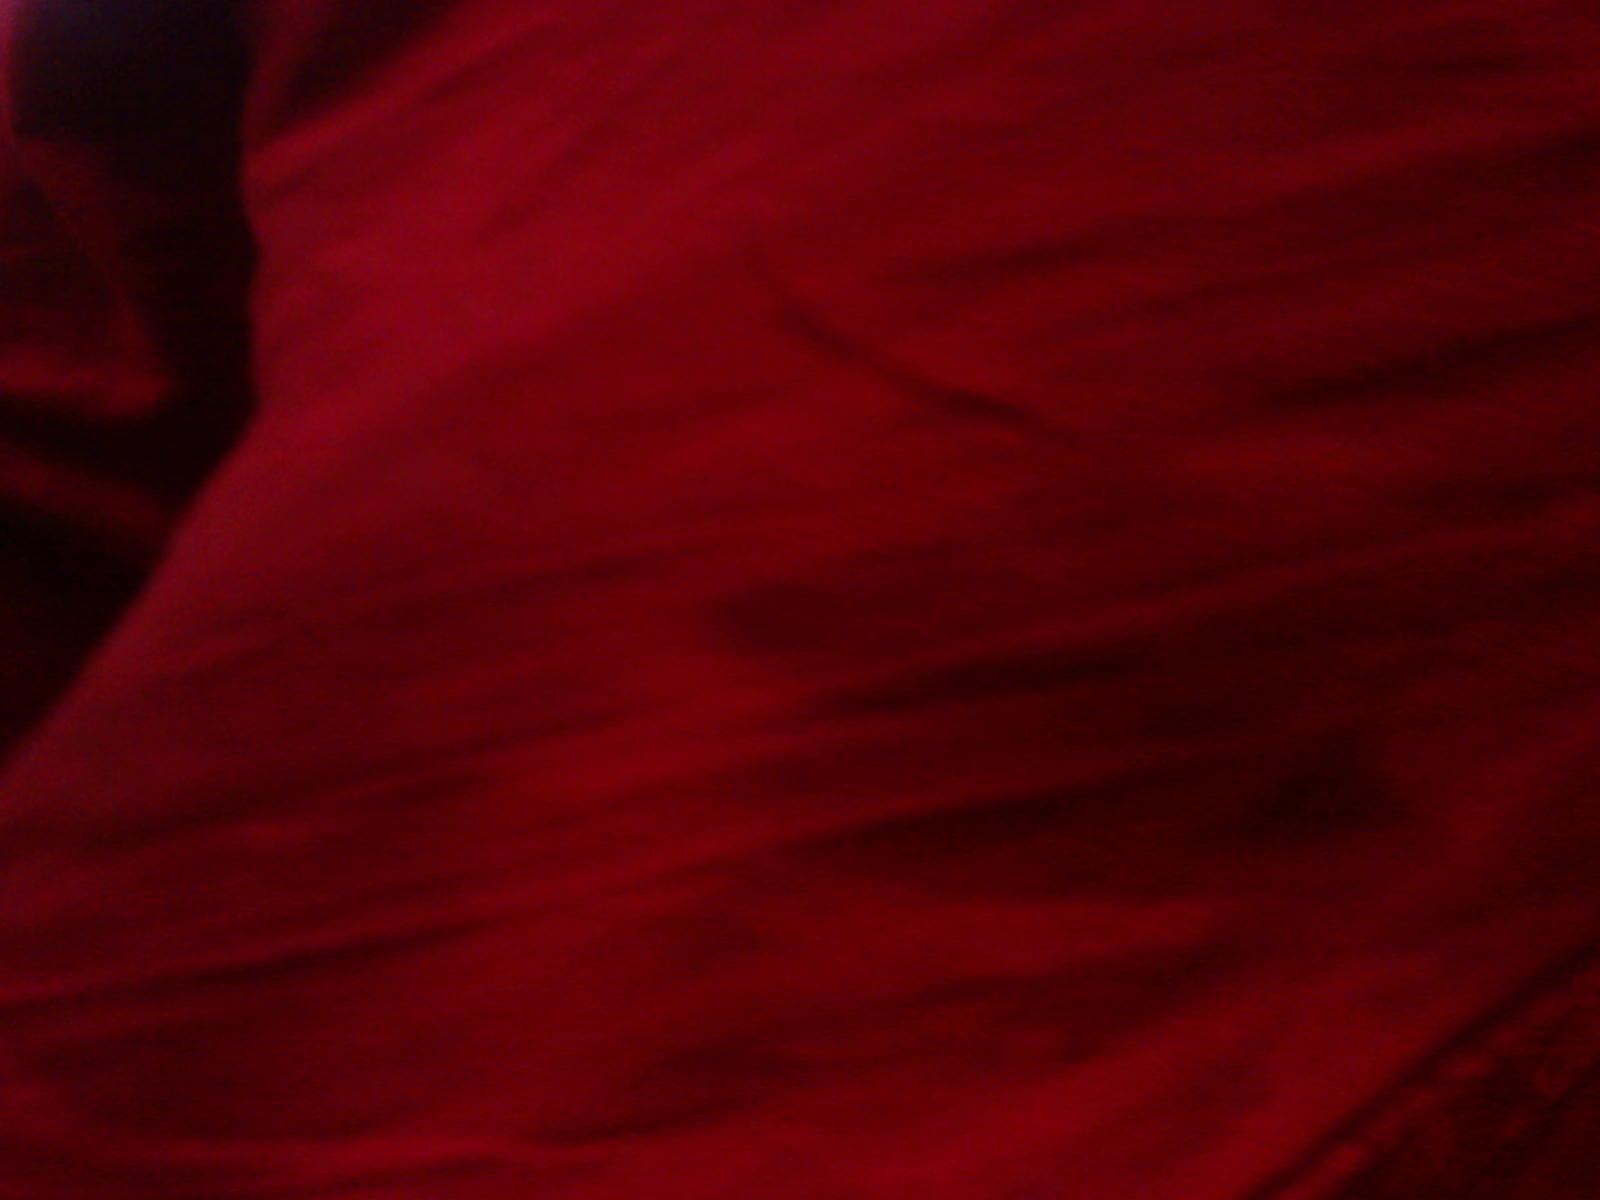 File:Red Cloth.jpg - Wikimedia Commons